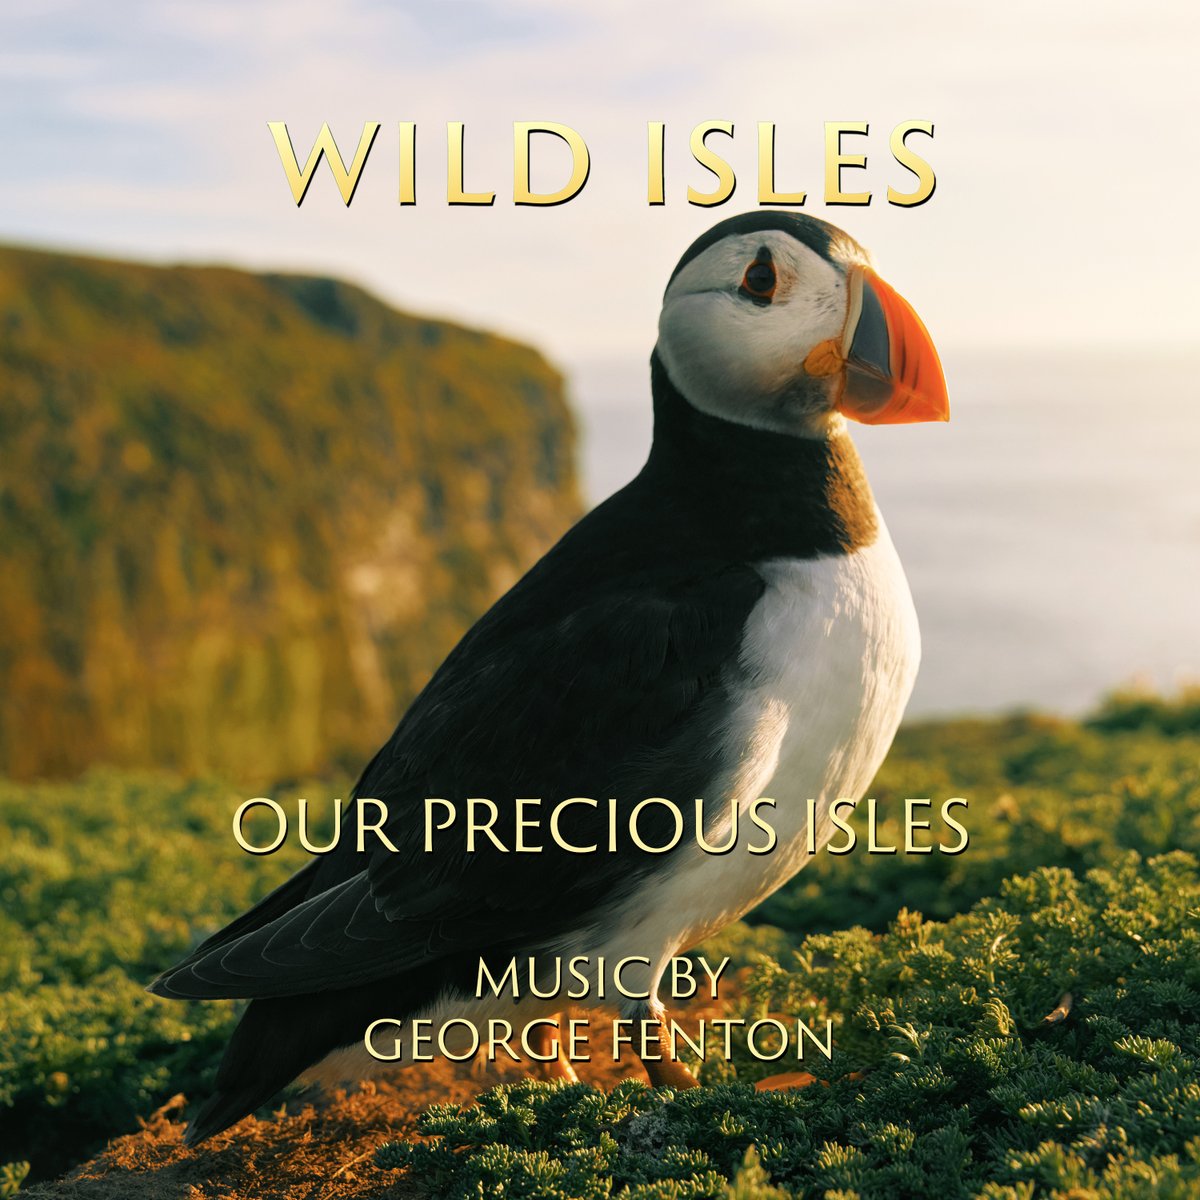 Hands up if you enjoyed the music from #WildIsles! 🙋🎶 From tense orca hunts to the ethereal sea slug scene, @GFentonMusic composed so many beautiful melodies to help capture the beauty of #UKNature. Stream all five soundtracks 👉 fal.cn/3xLig @umpg_uk @BBCiPlayer